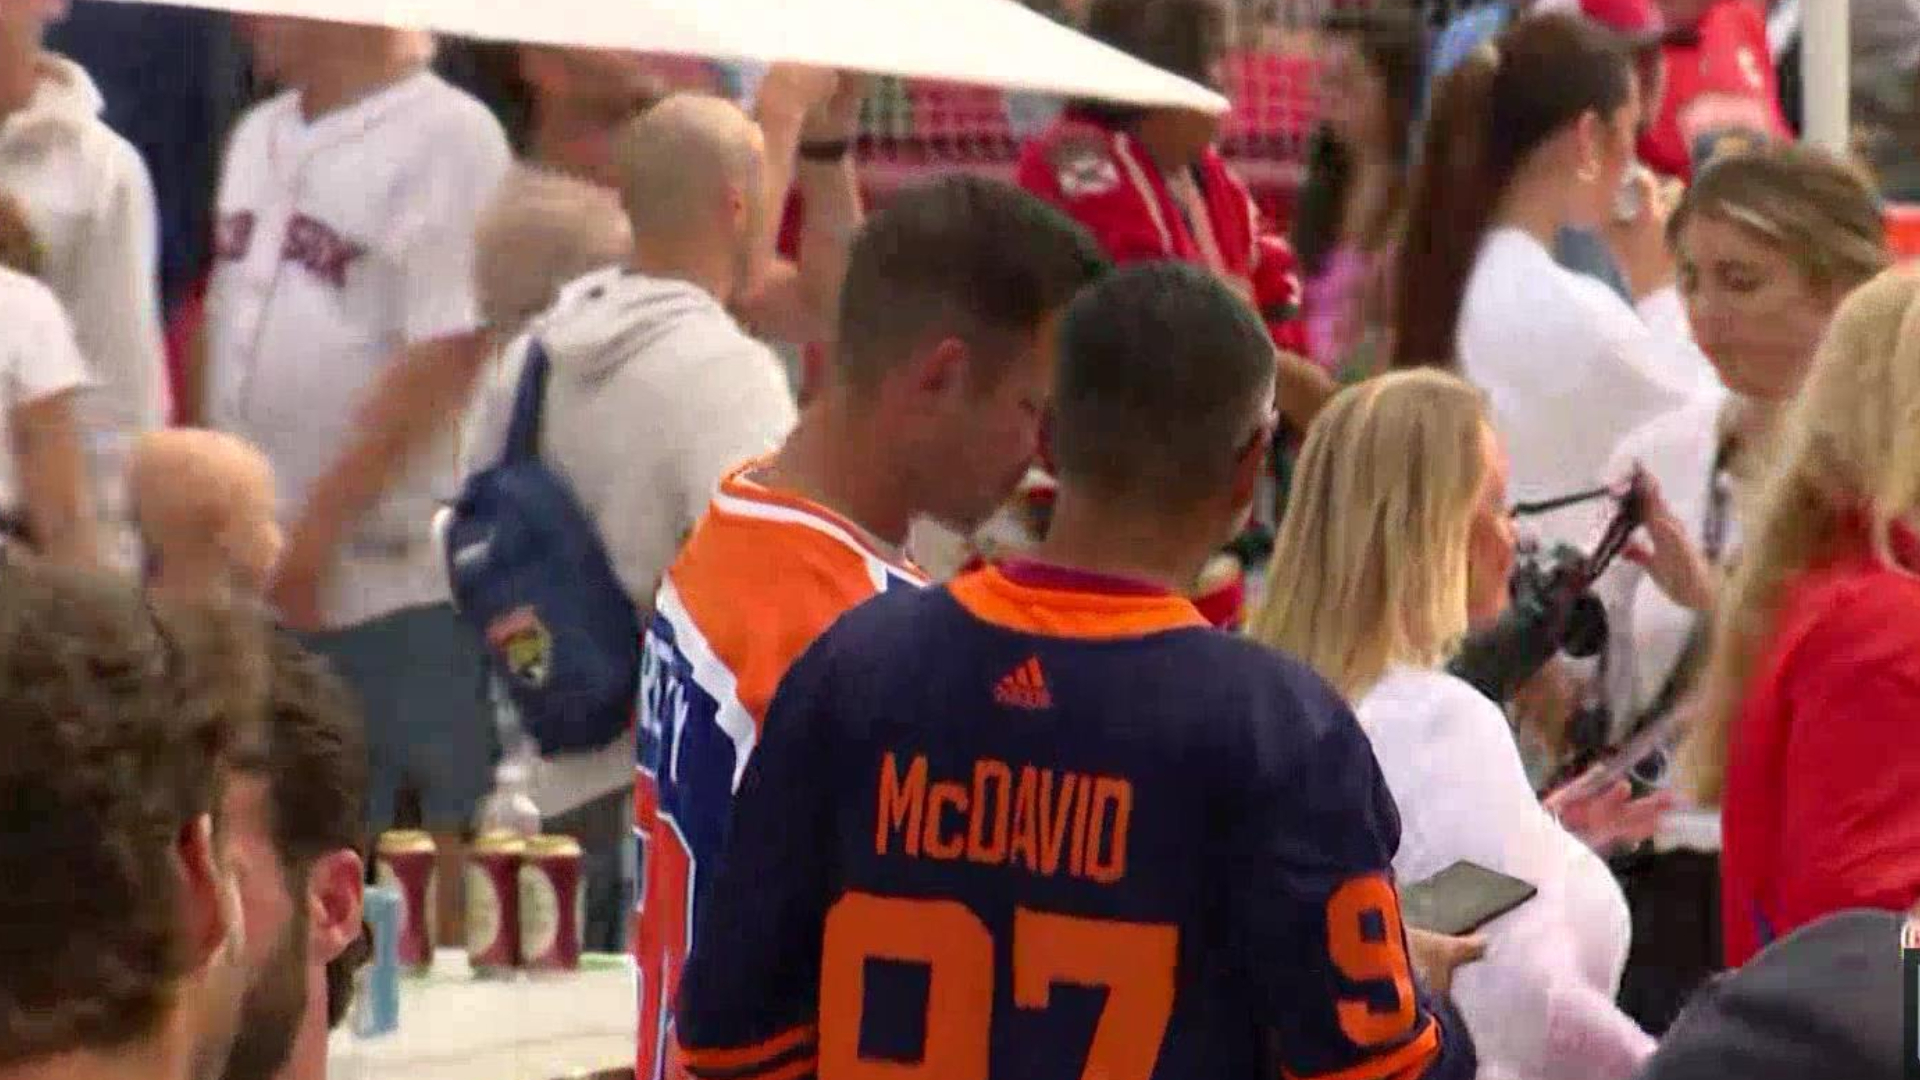 Oilers fans make their presence known in Florida for Game 7